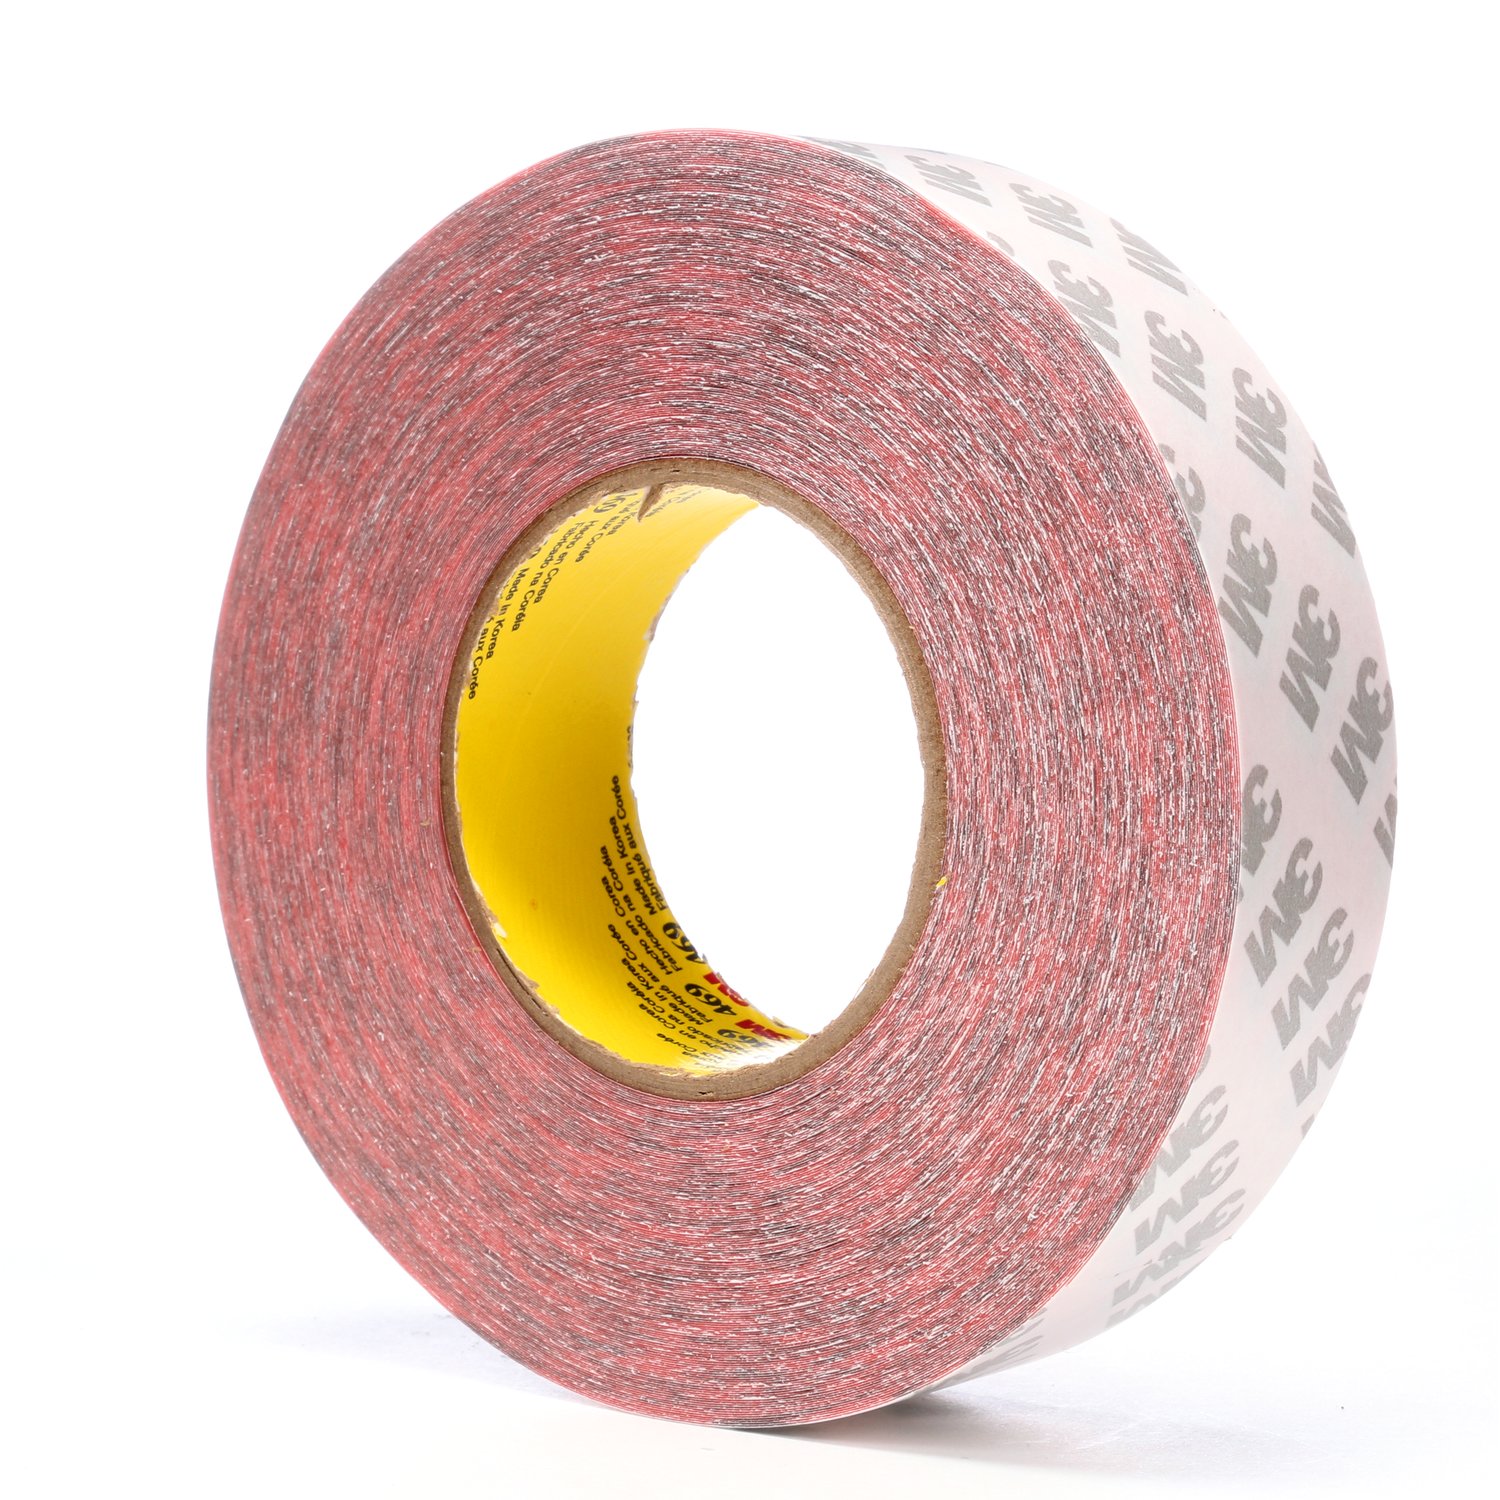 7000123758 - 3M Double Coated Tape 469, Red, 1 1/2 in x 60 yd, 5.5 mil, 24 rolls per
case